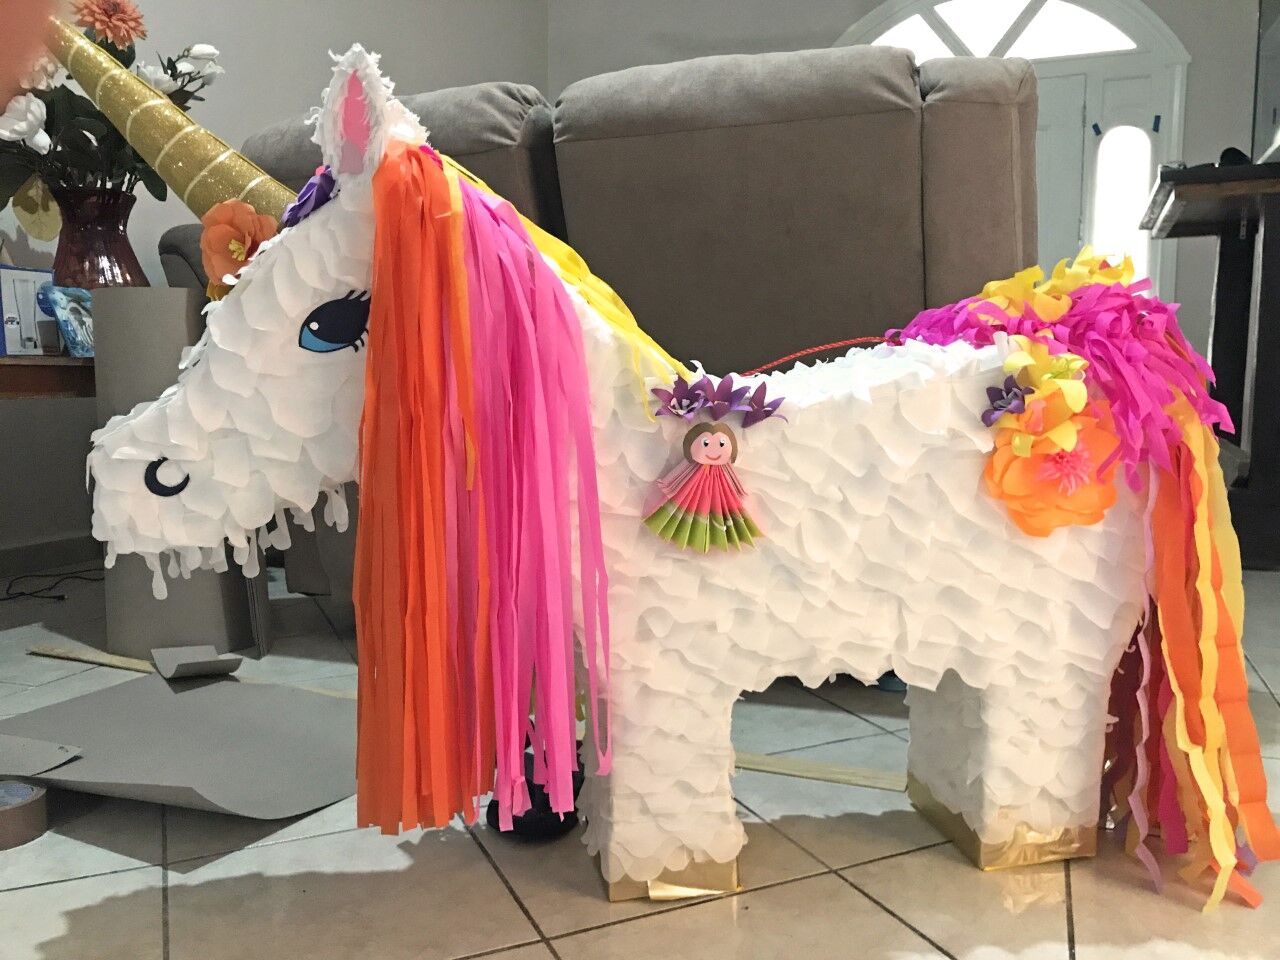 Learn to make your own piñata, Arts & Events